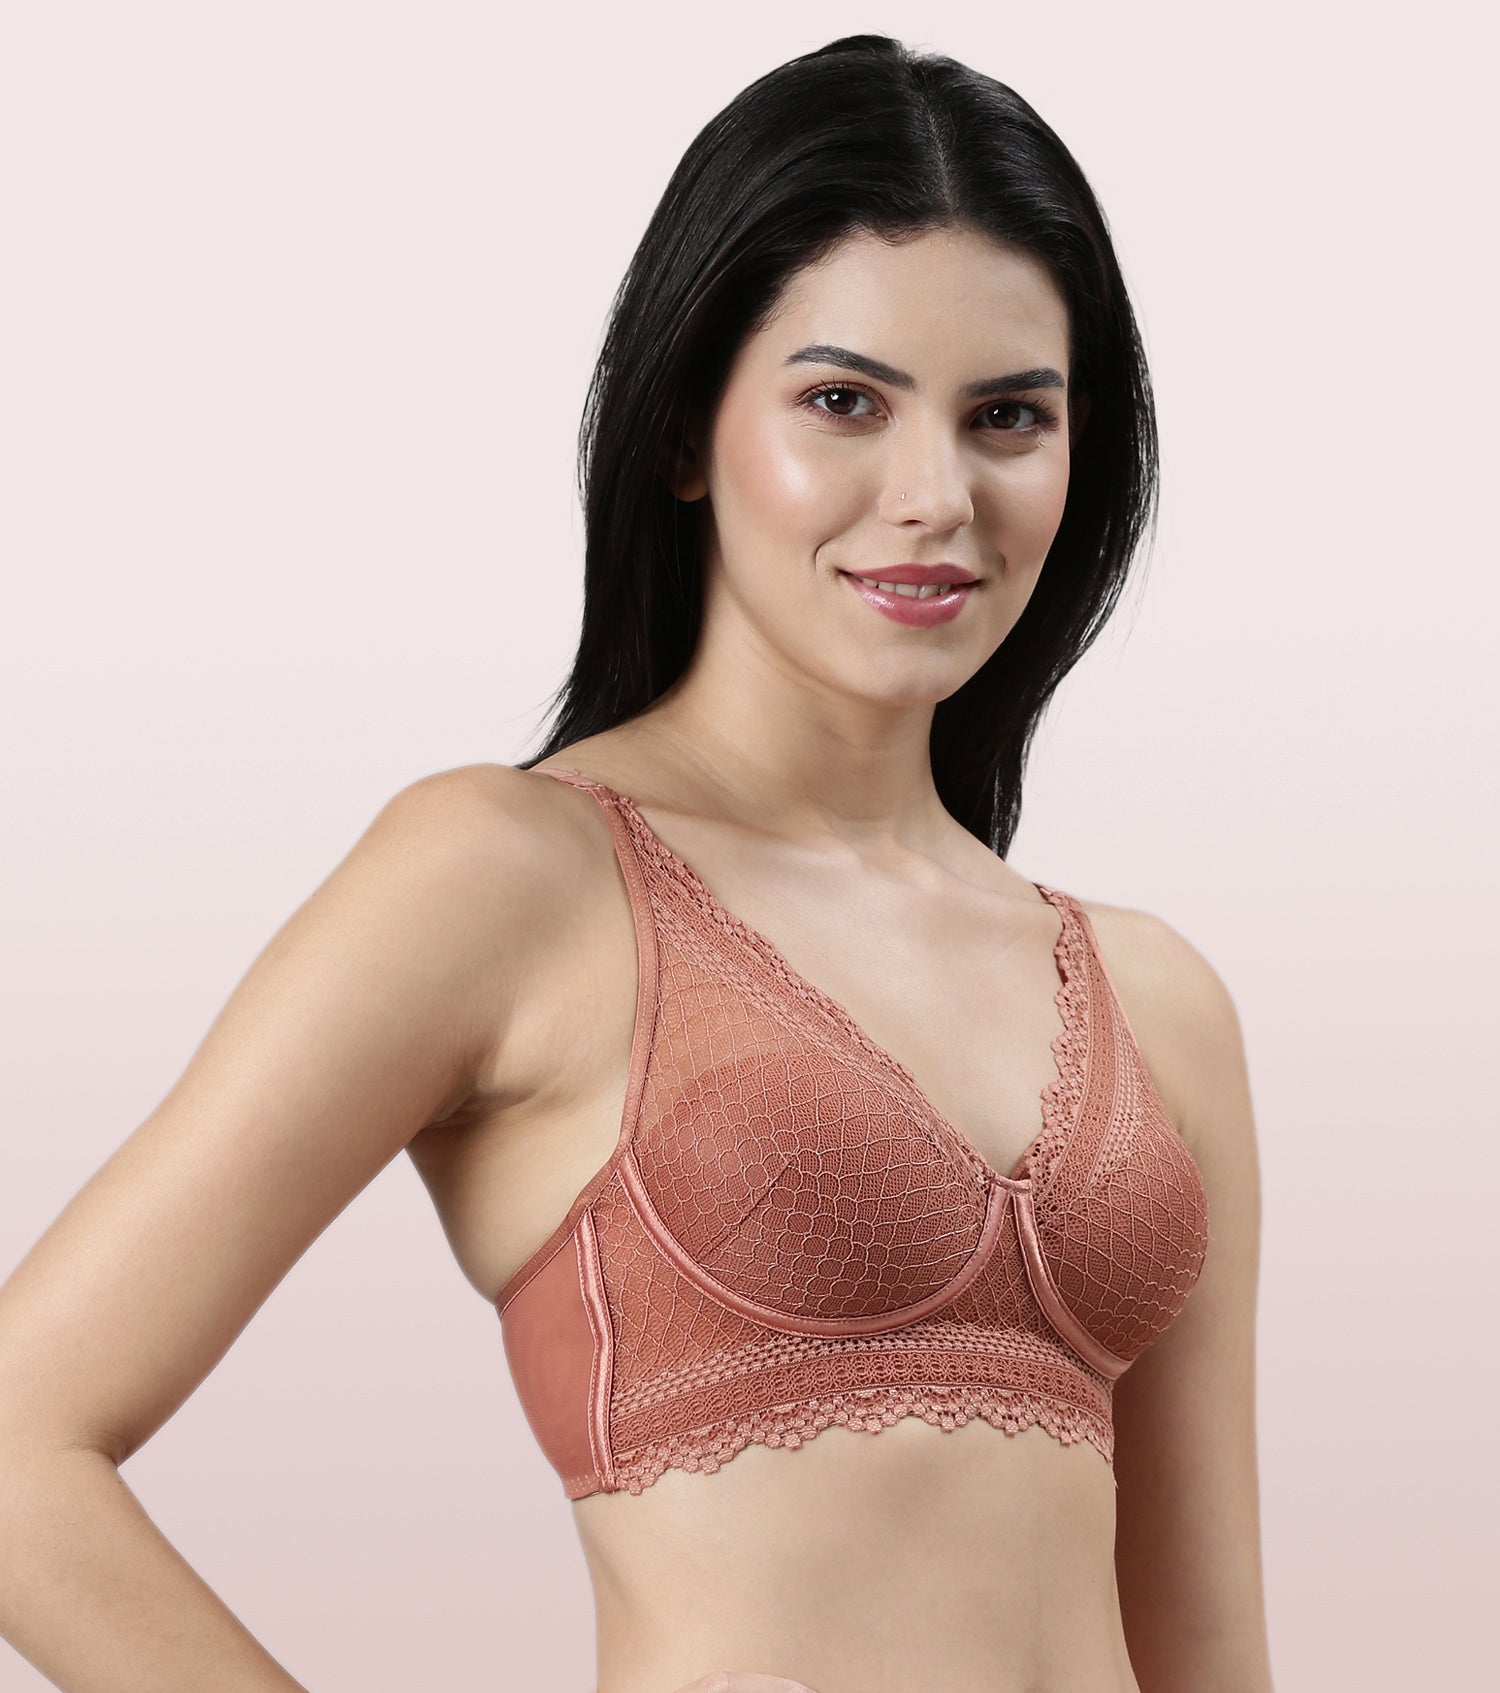 Enamor F125
LONGLINE COMFORT LACE BRA
PADDED WIREFREE HIGH COVERAGE